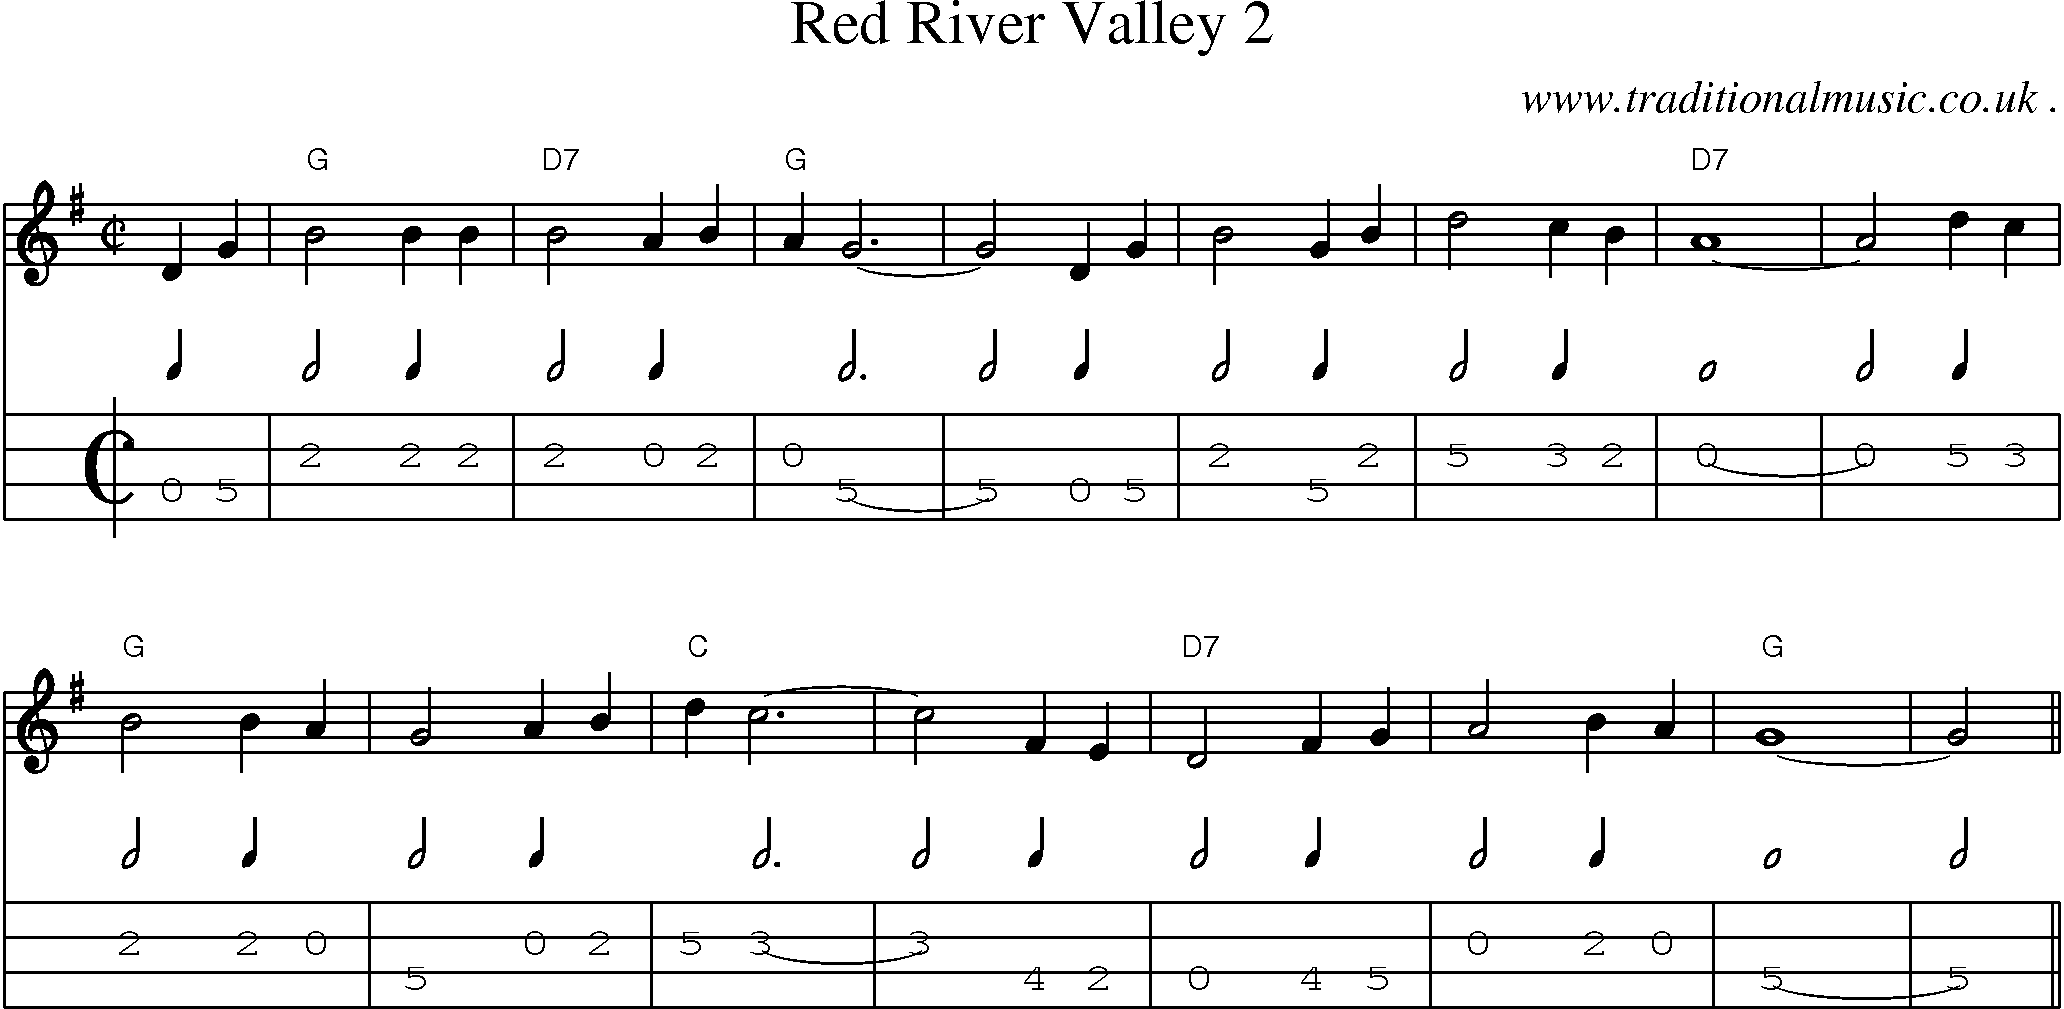 Music Score and Mandolin Tabs for Red River Valley 2